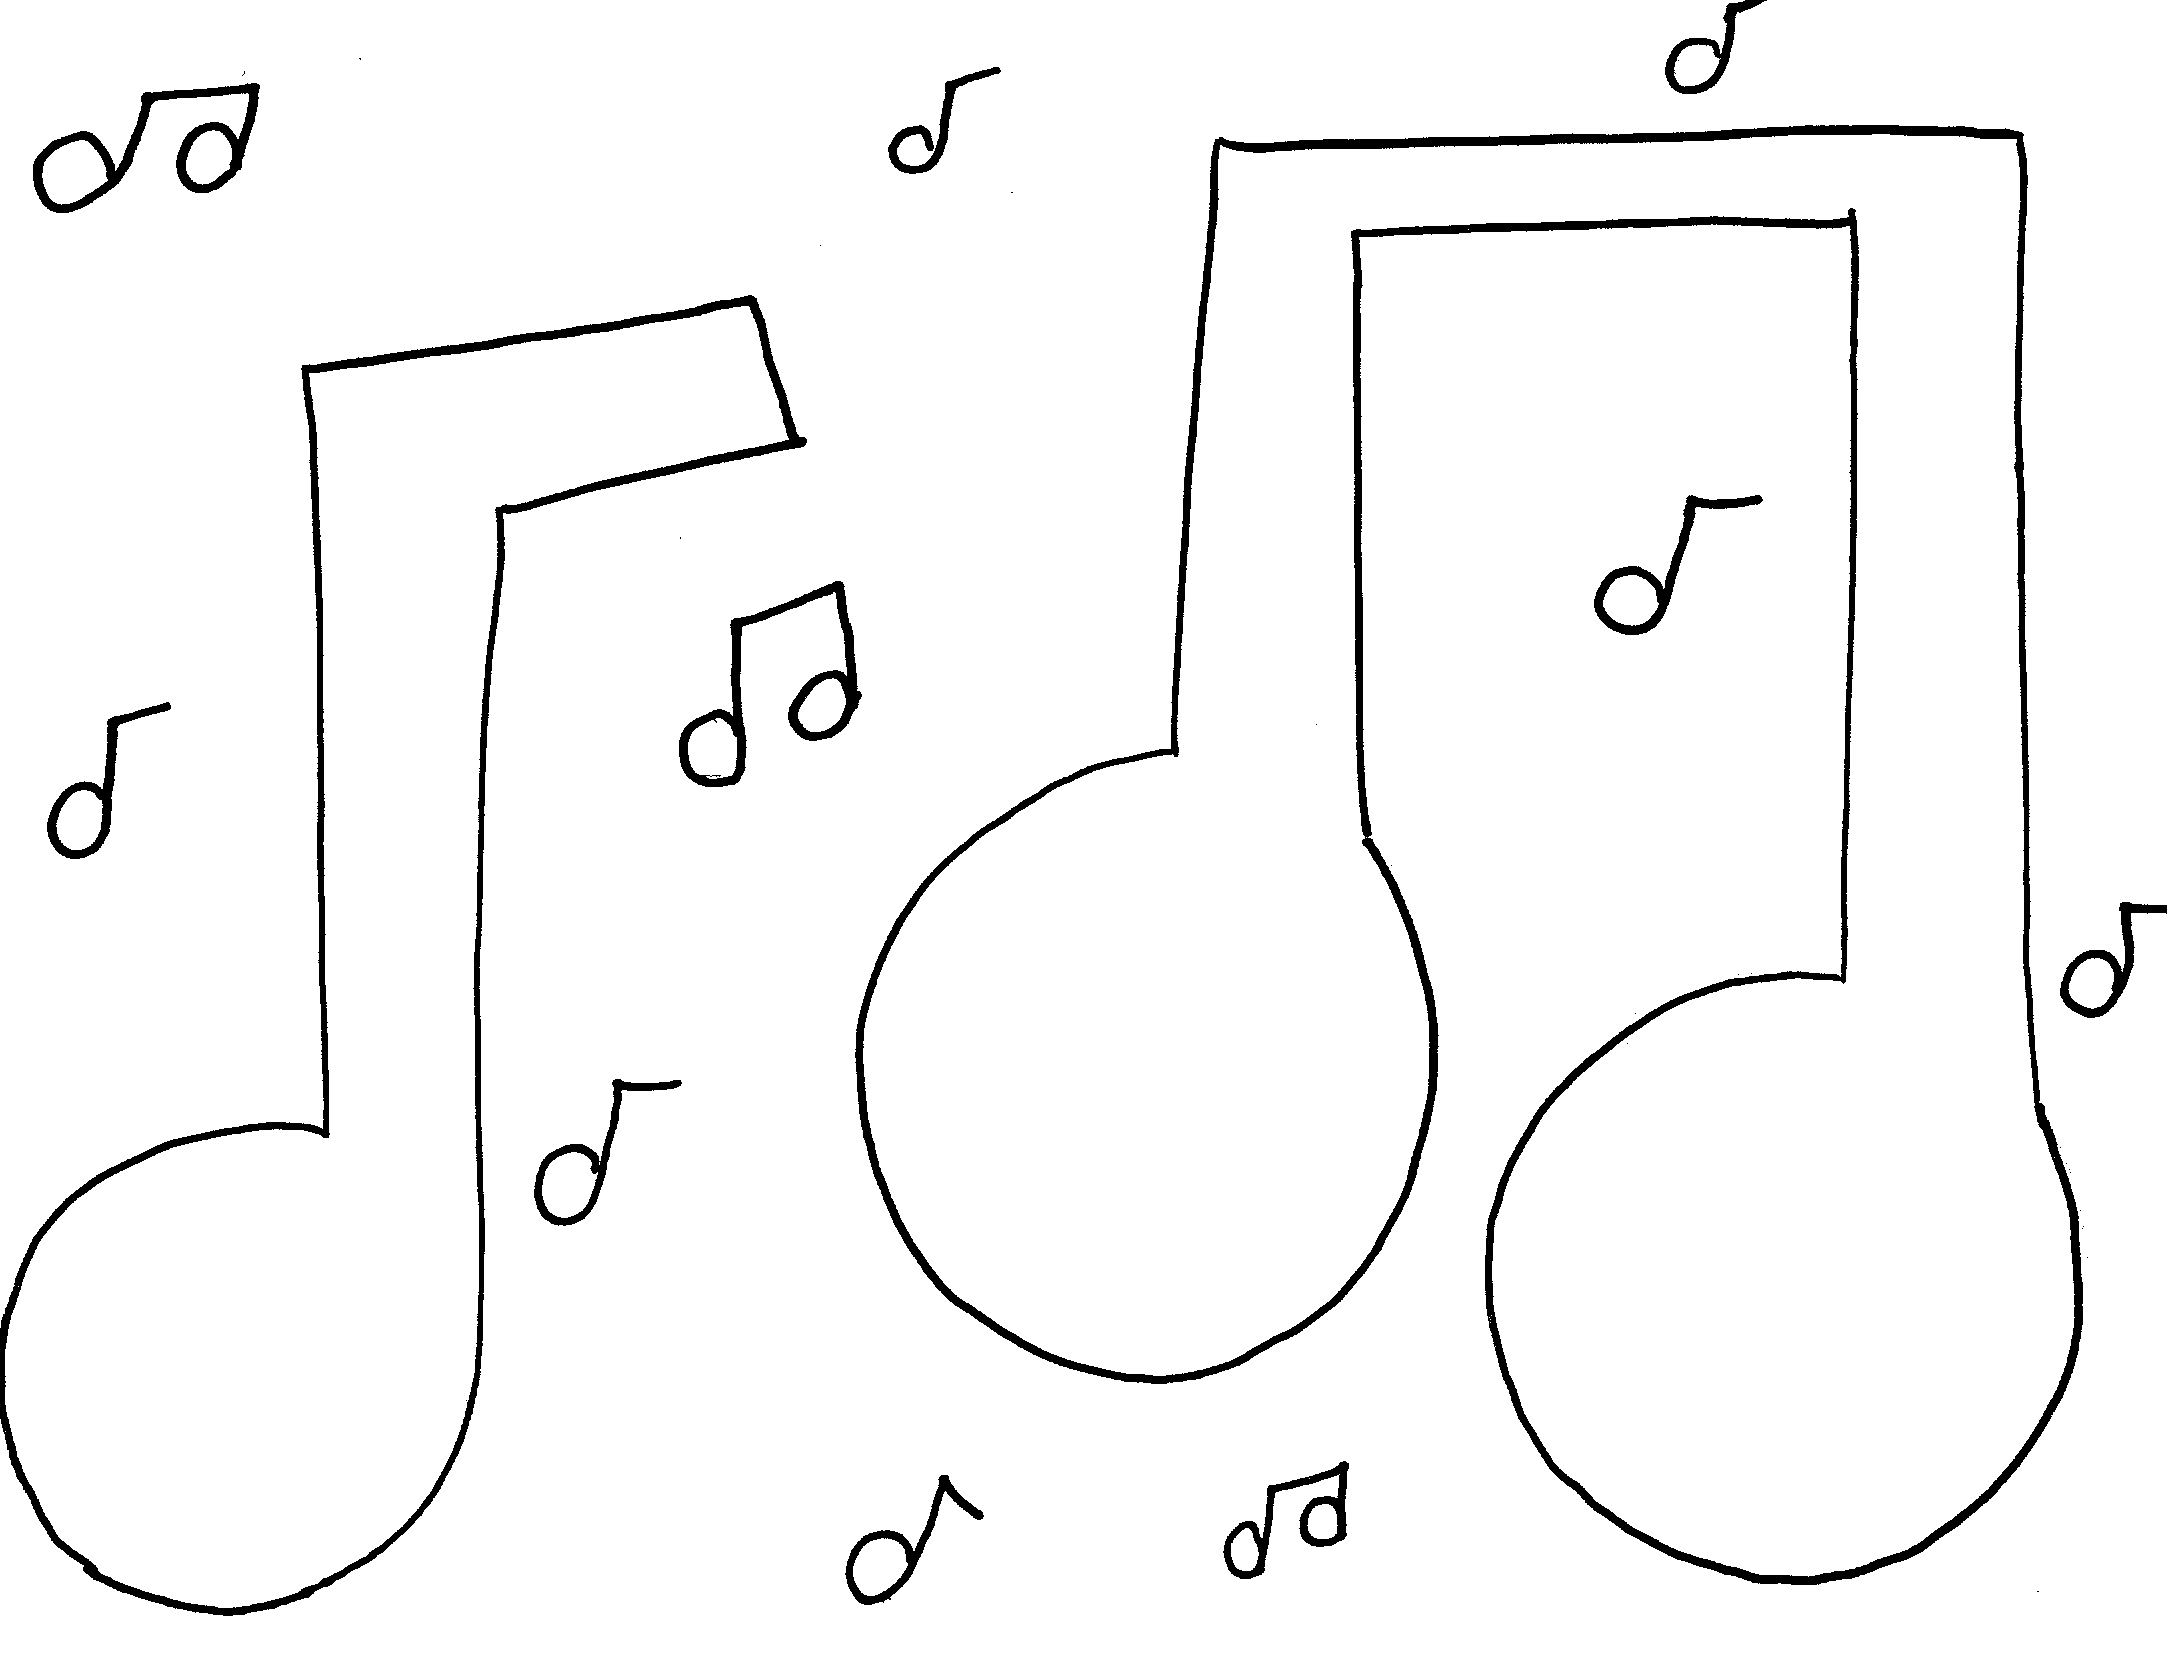 Music note coloring pages to download and print for free